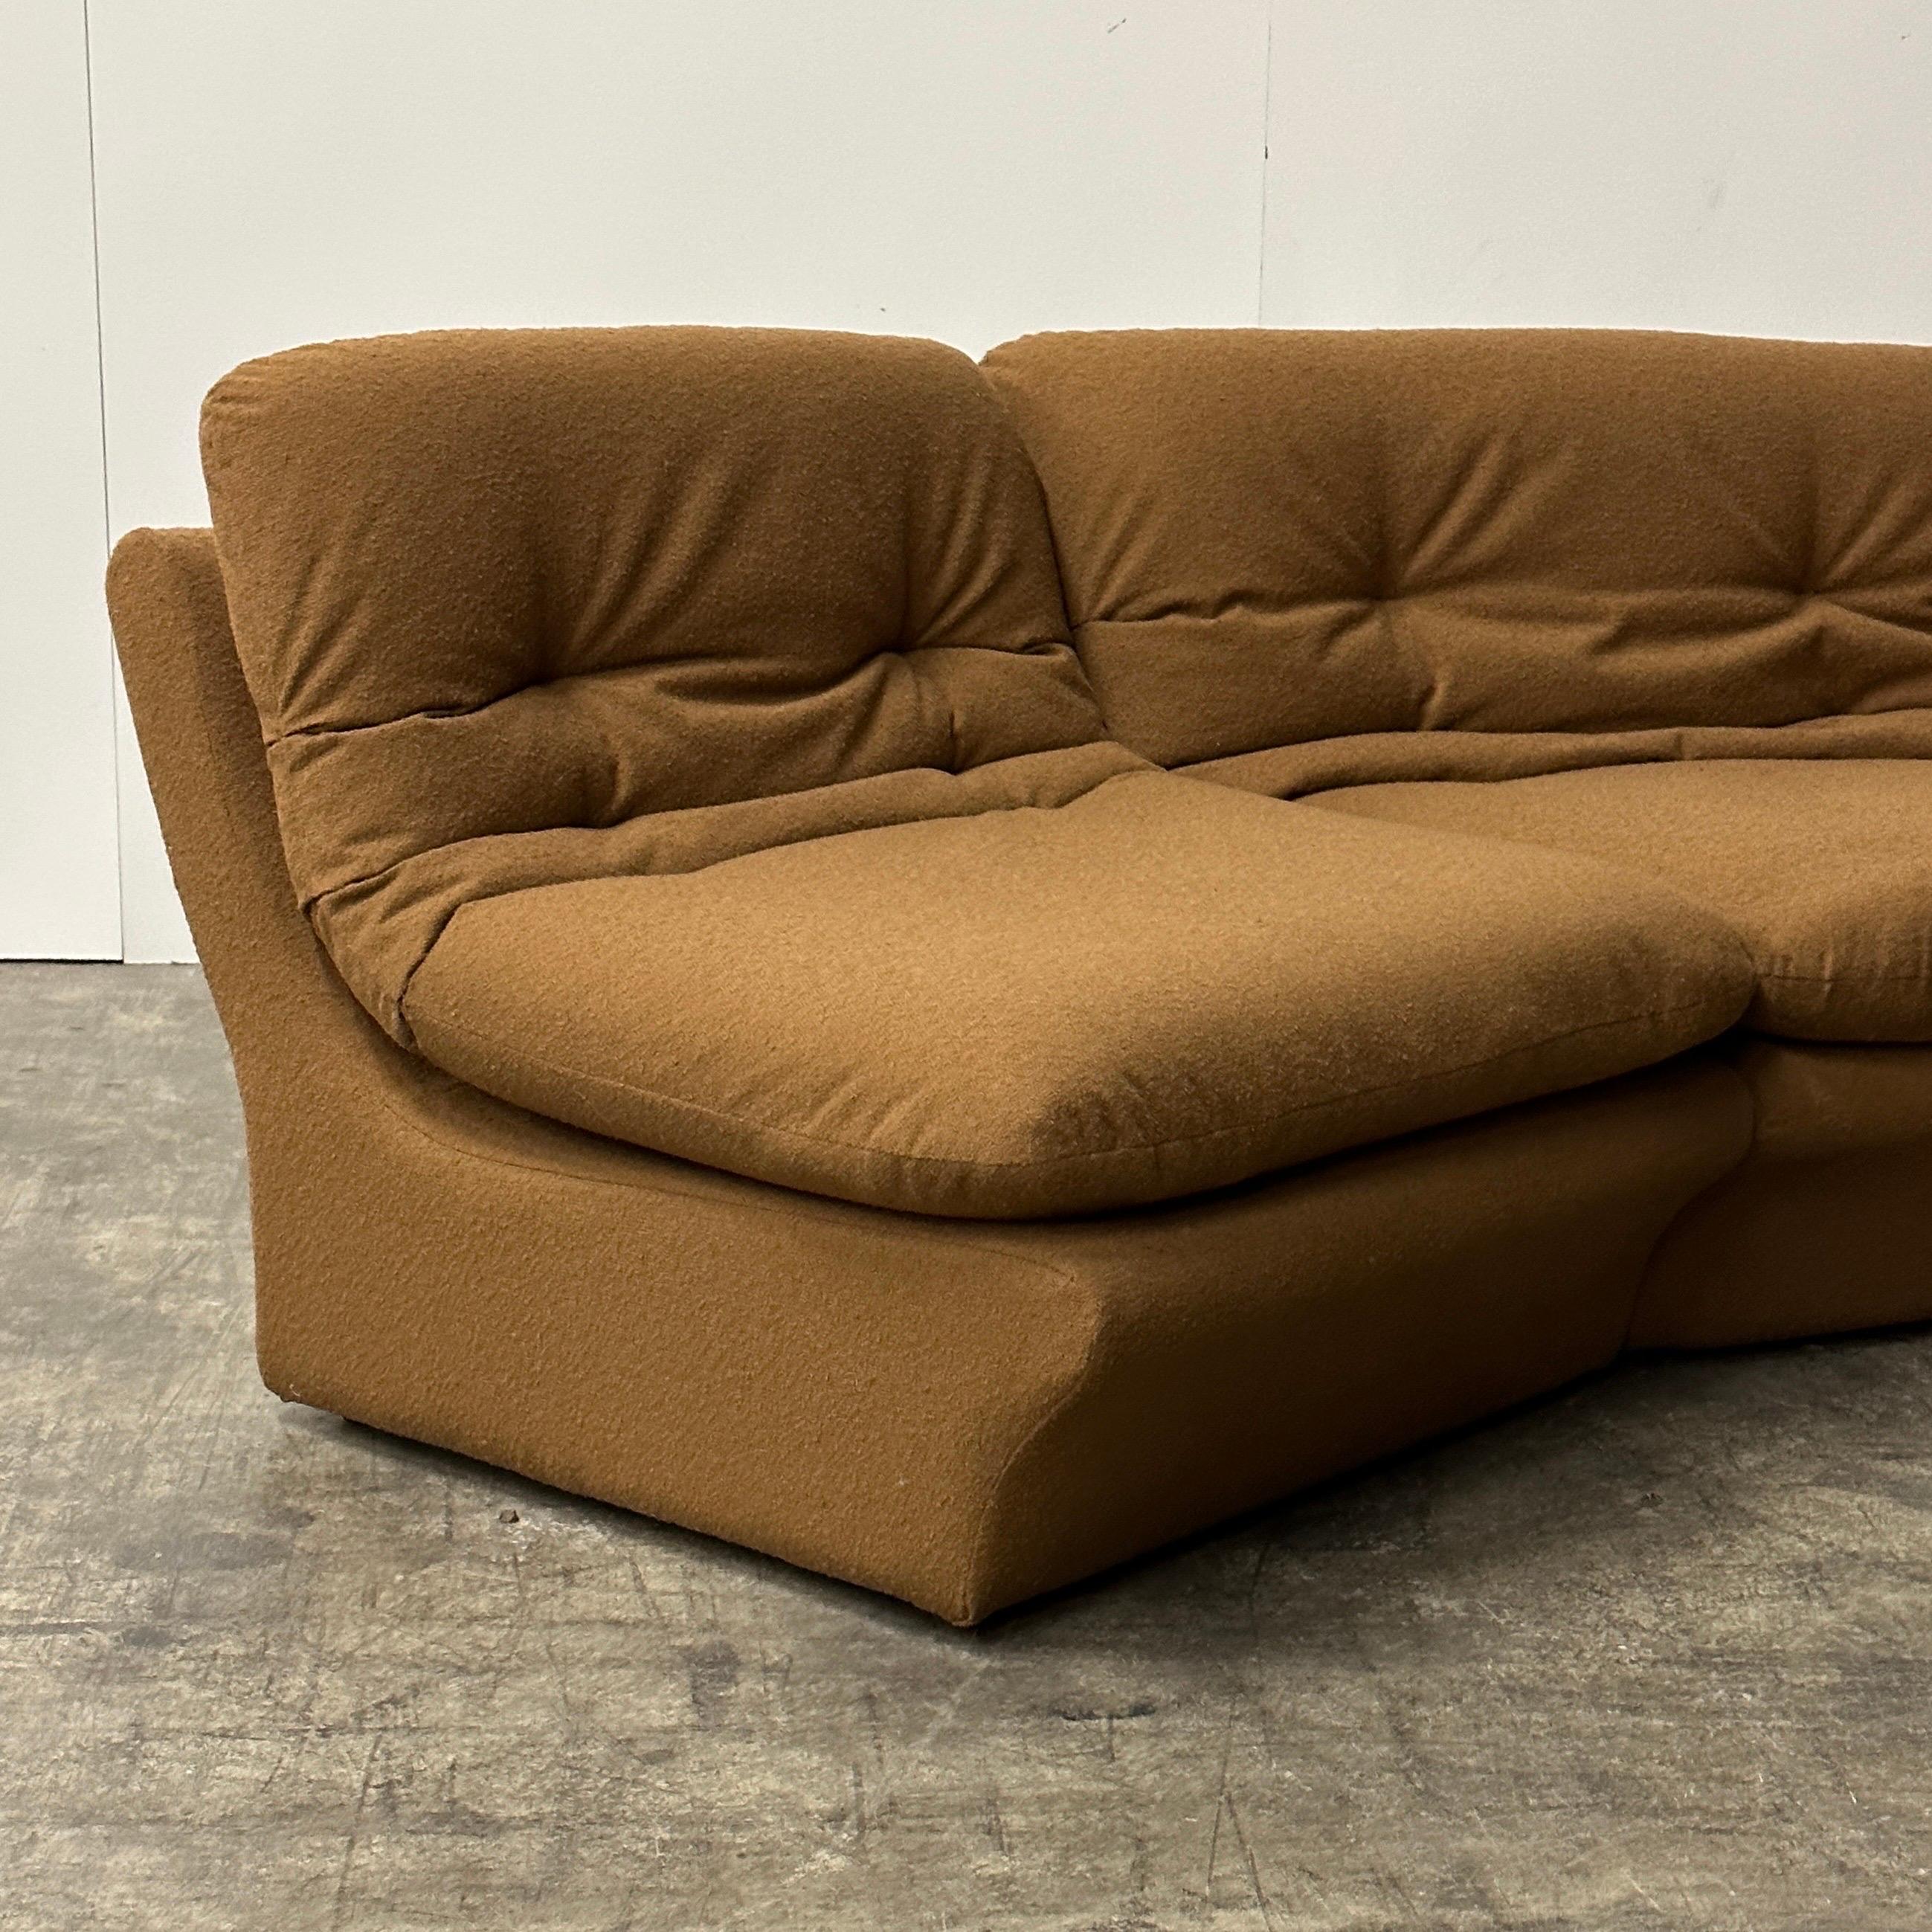 Post-Modern Modular Postmodern Sectional Attributed to Vladimir Kagan for Preview